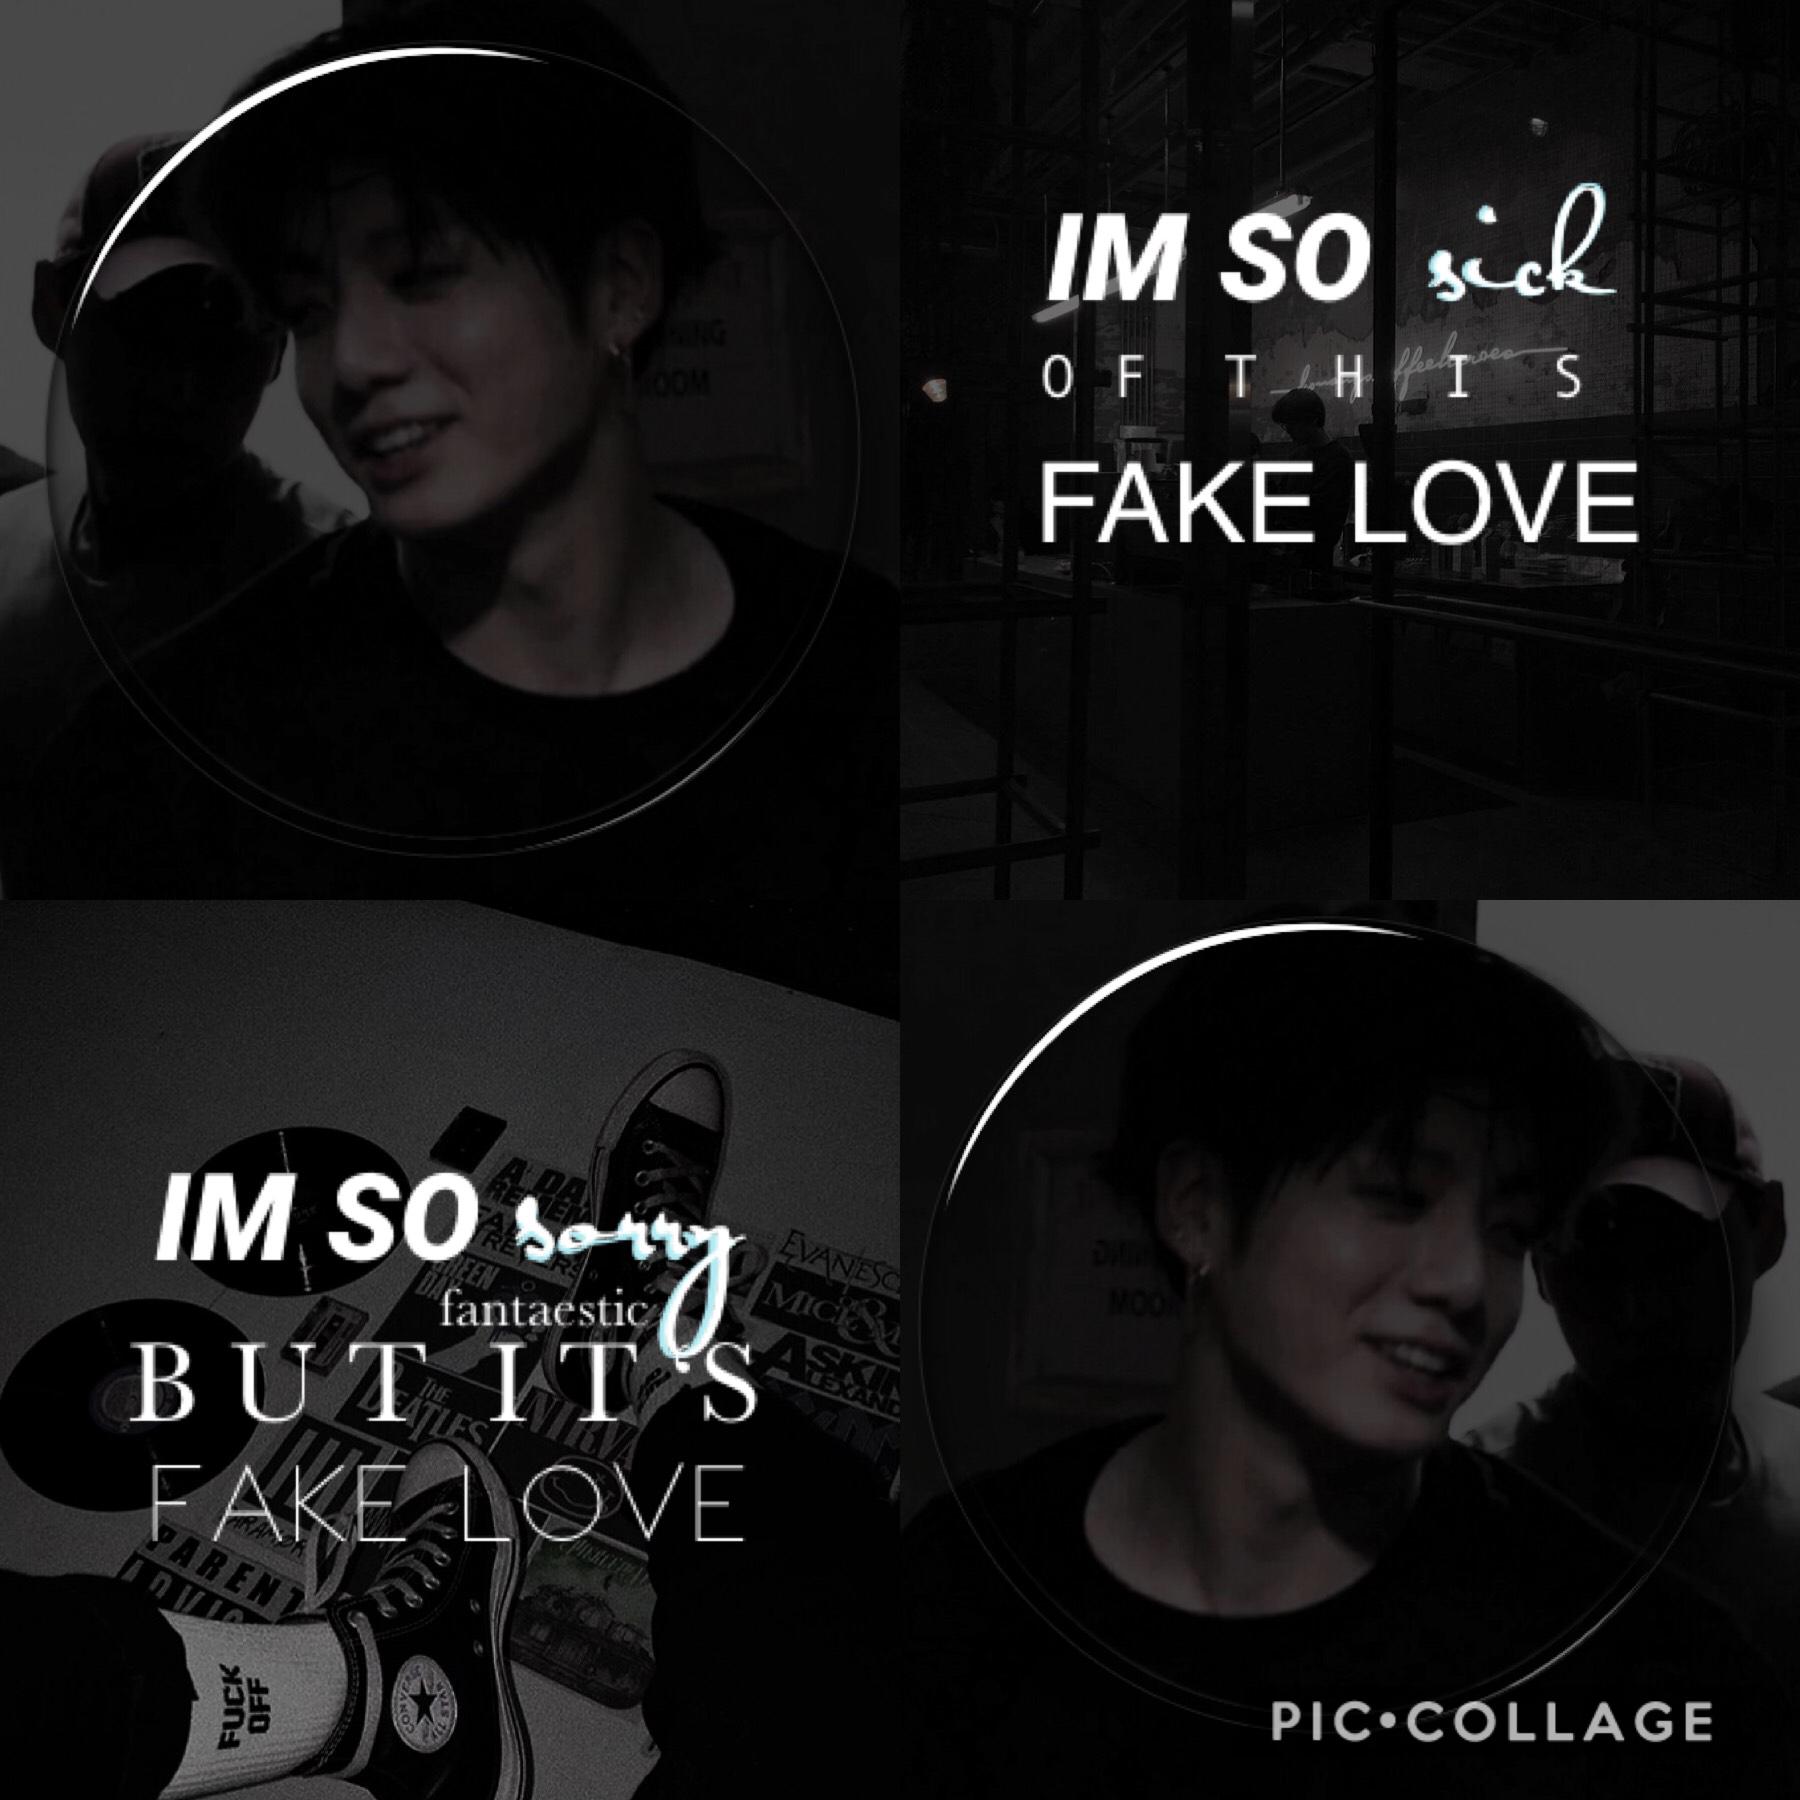 ✦ ‧₊˚๑ open me ✦ ‧₊˚๑
did you miss me? i did.
im so sorry for being inactive for almost 2 months, i thought about leaving pc bc i didnt feel likey edits were cool enough 😔